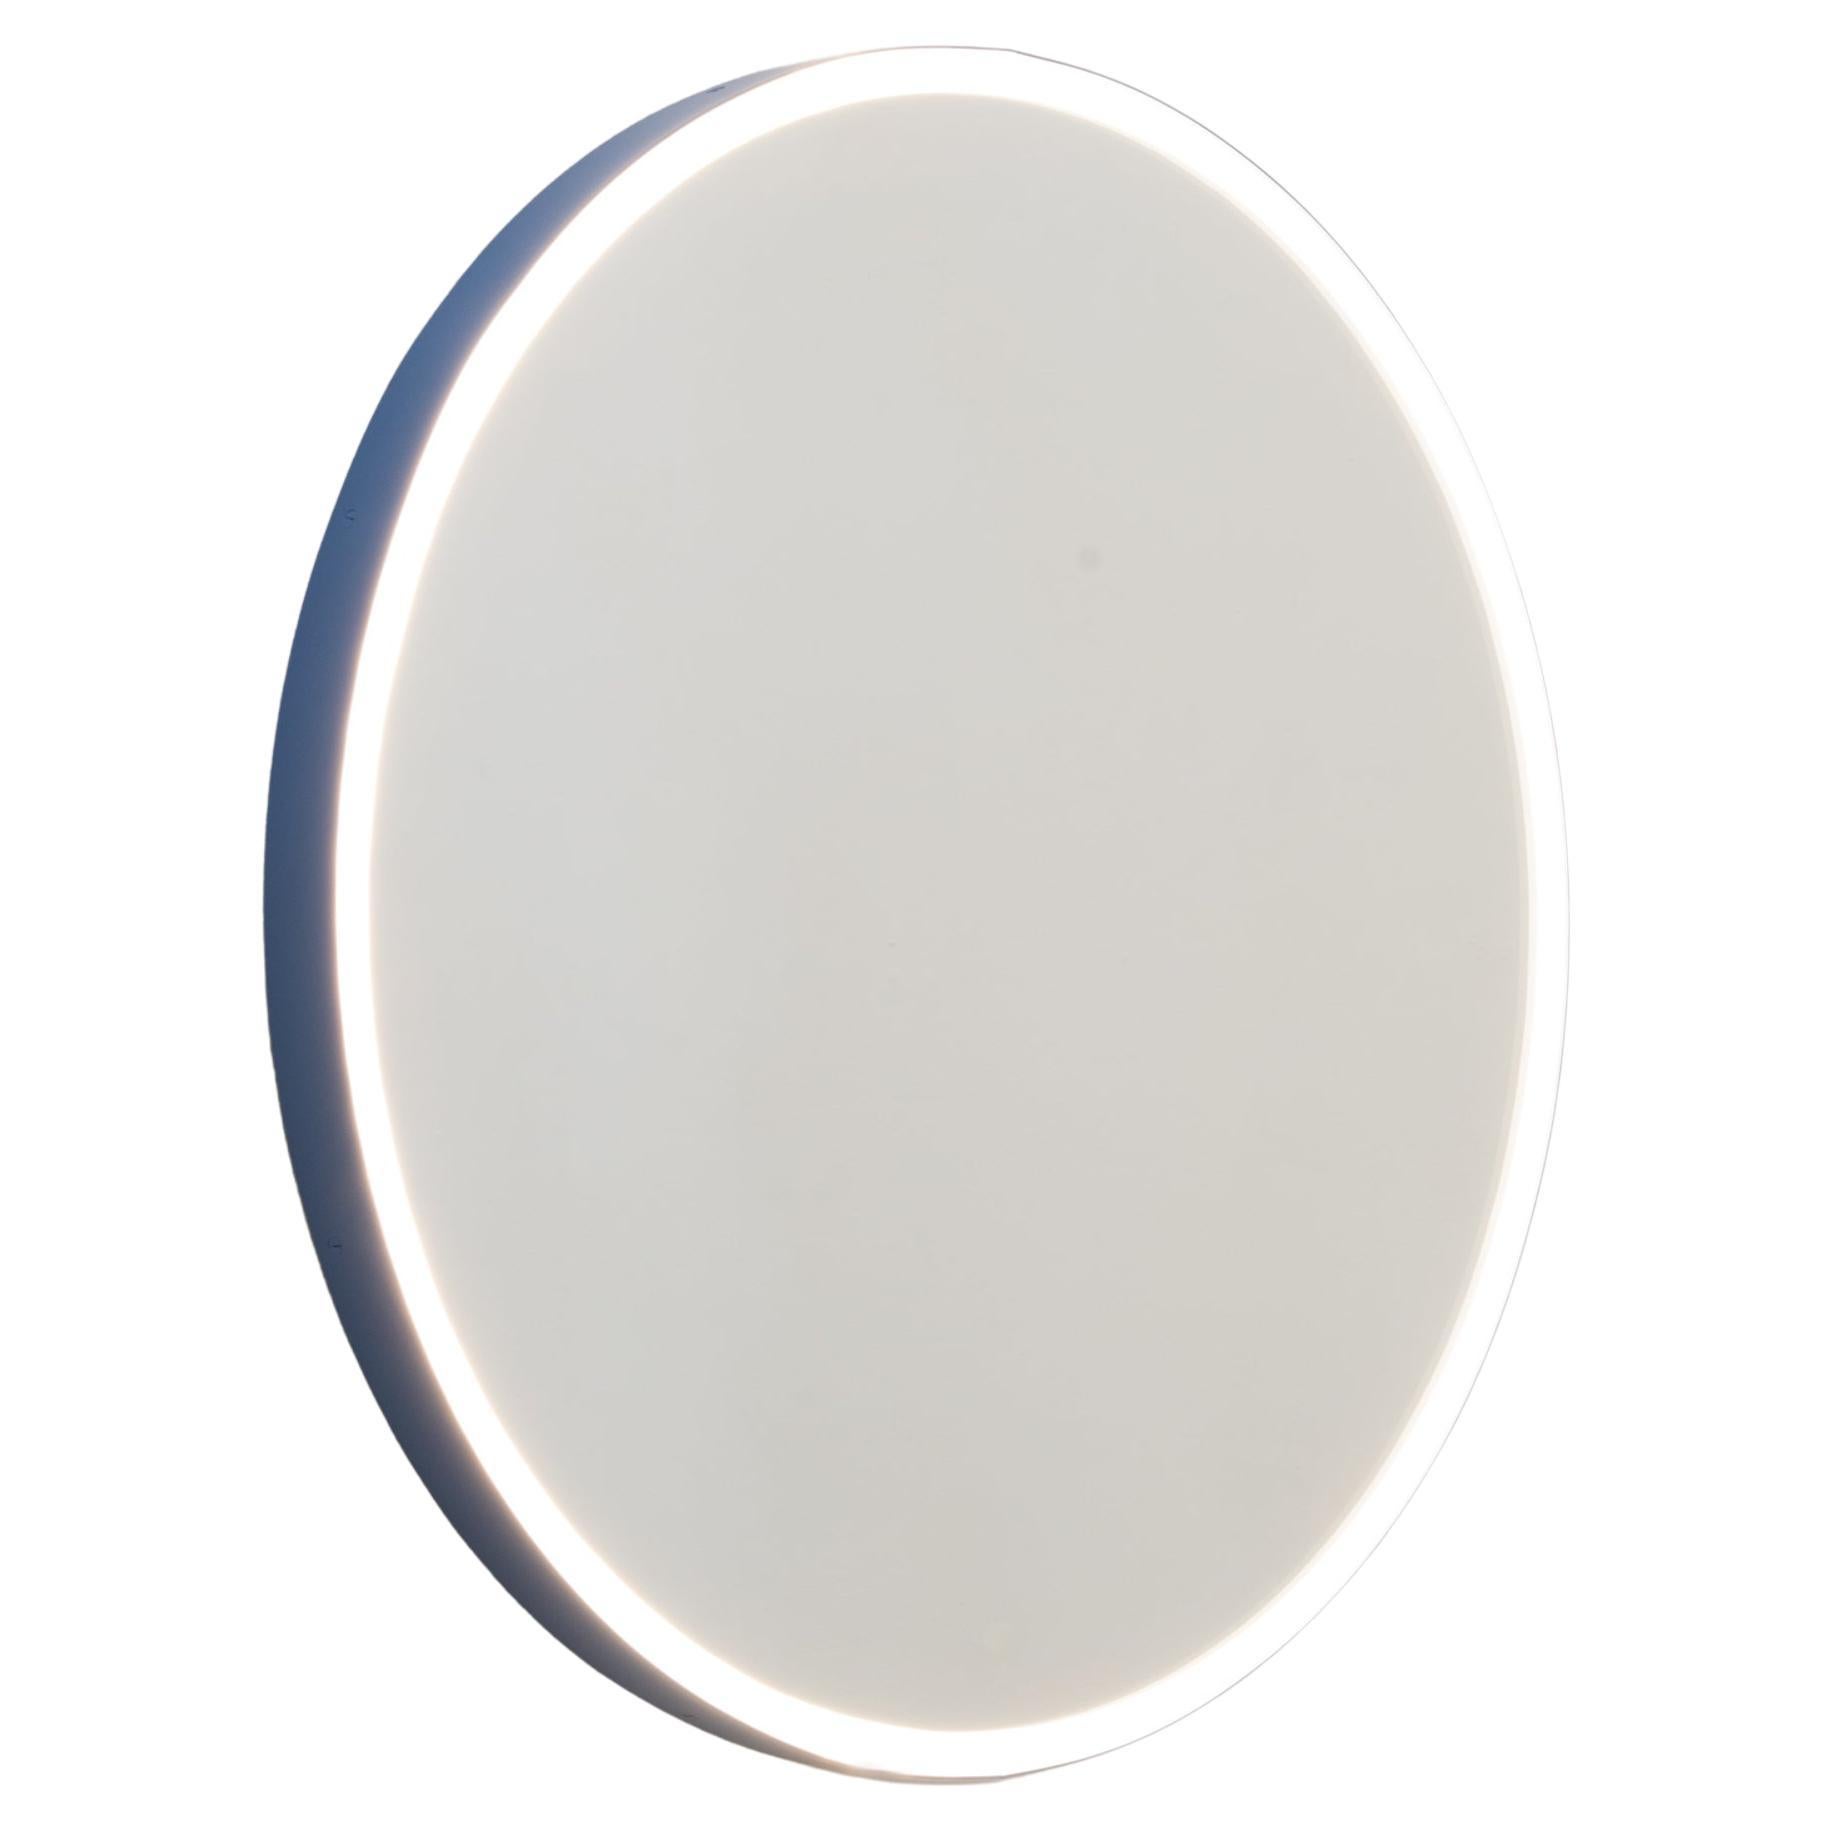 Orbis Front Illuminated Round Contemporary Mirror with Blue Frame, Medium For Sale